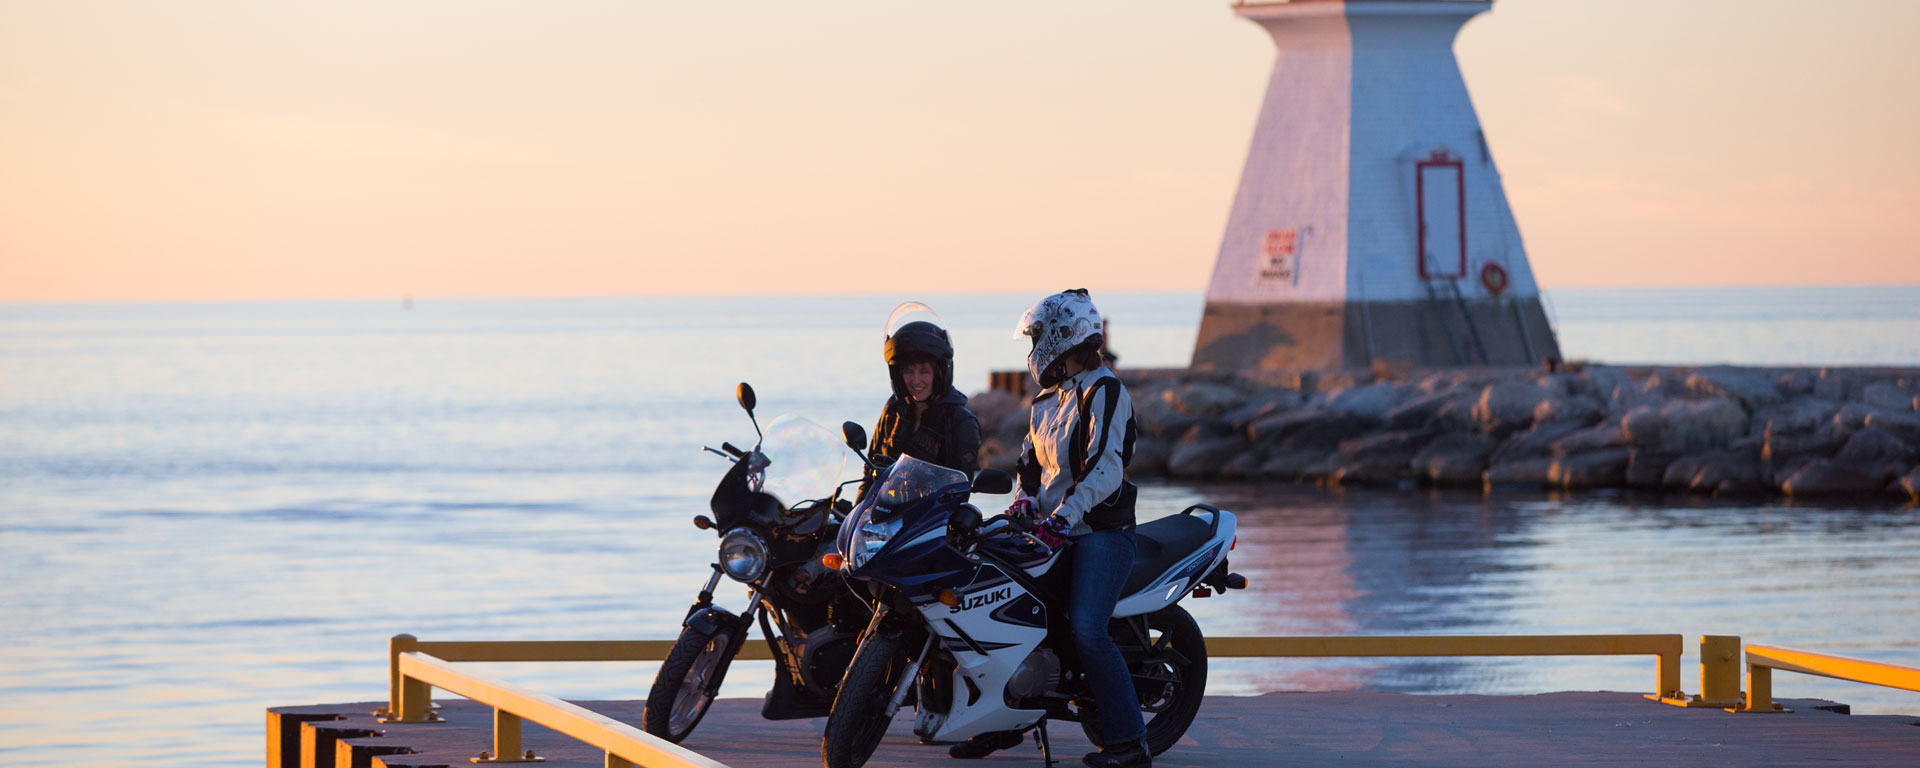 two bikers stopped on a pier, chatting with each other on a lighthouse motorcycle tour